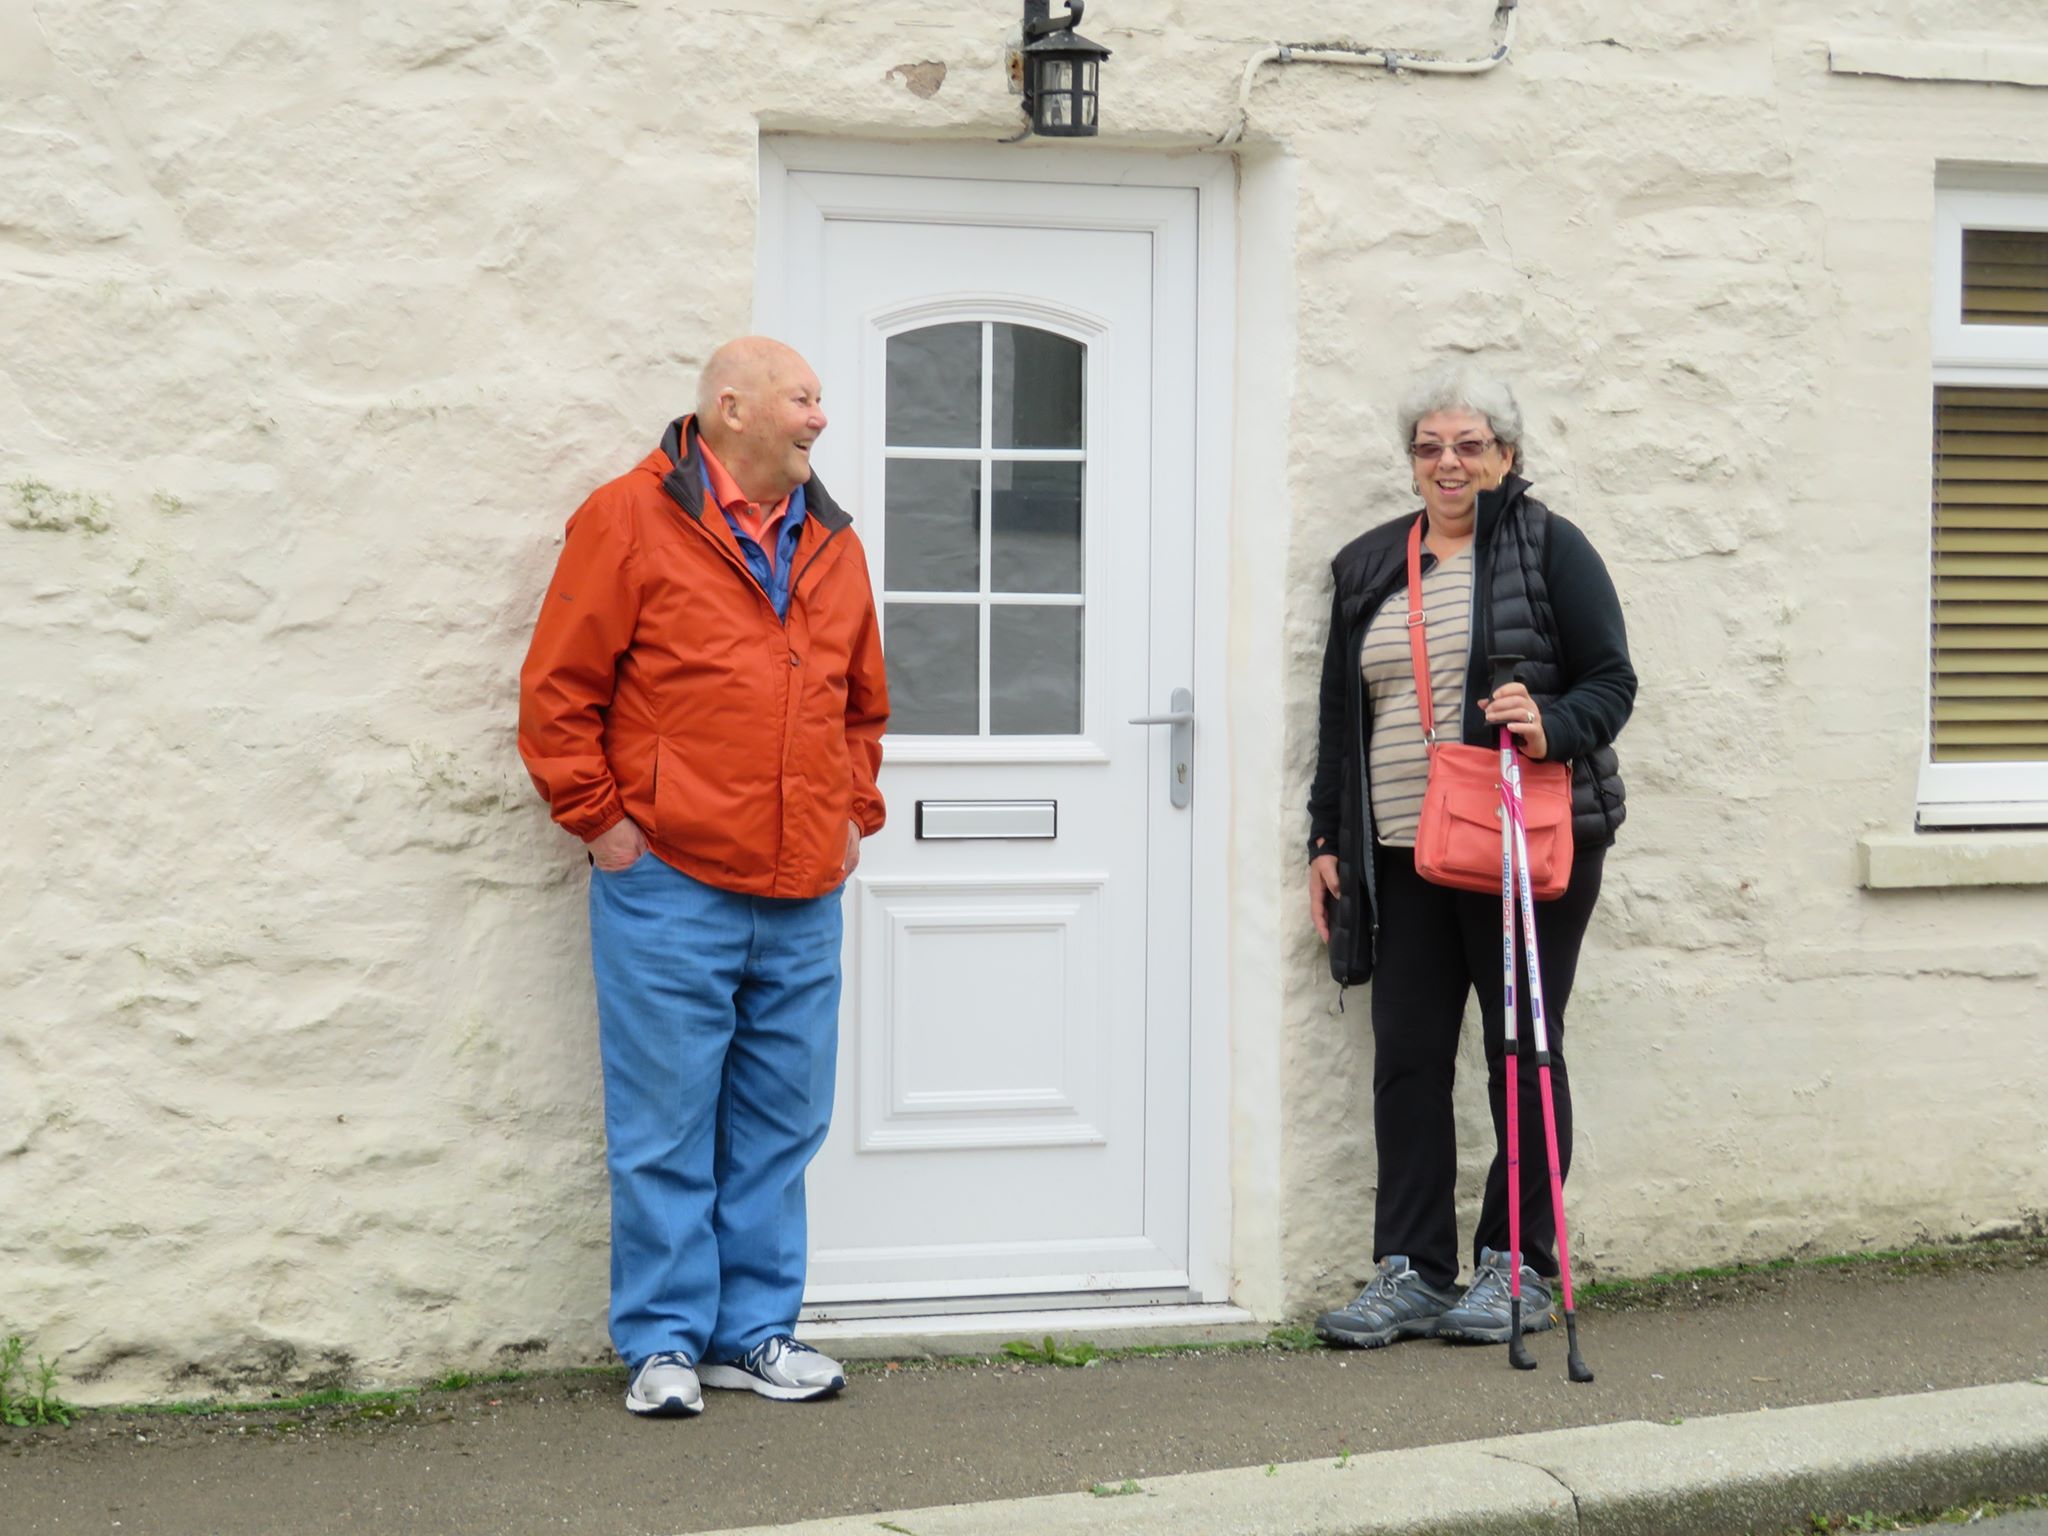 A man and woman with a walking sticks standing in front of a white door